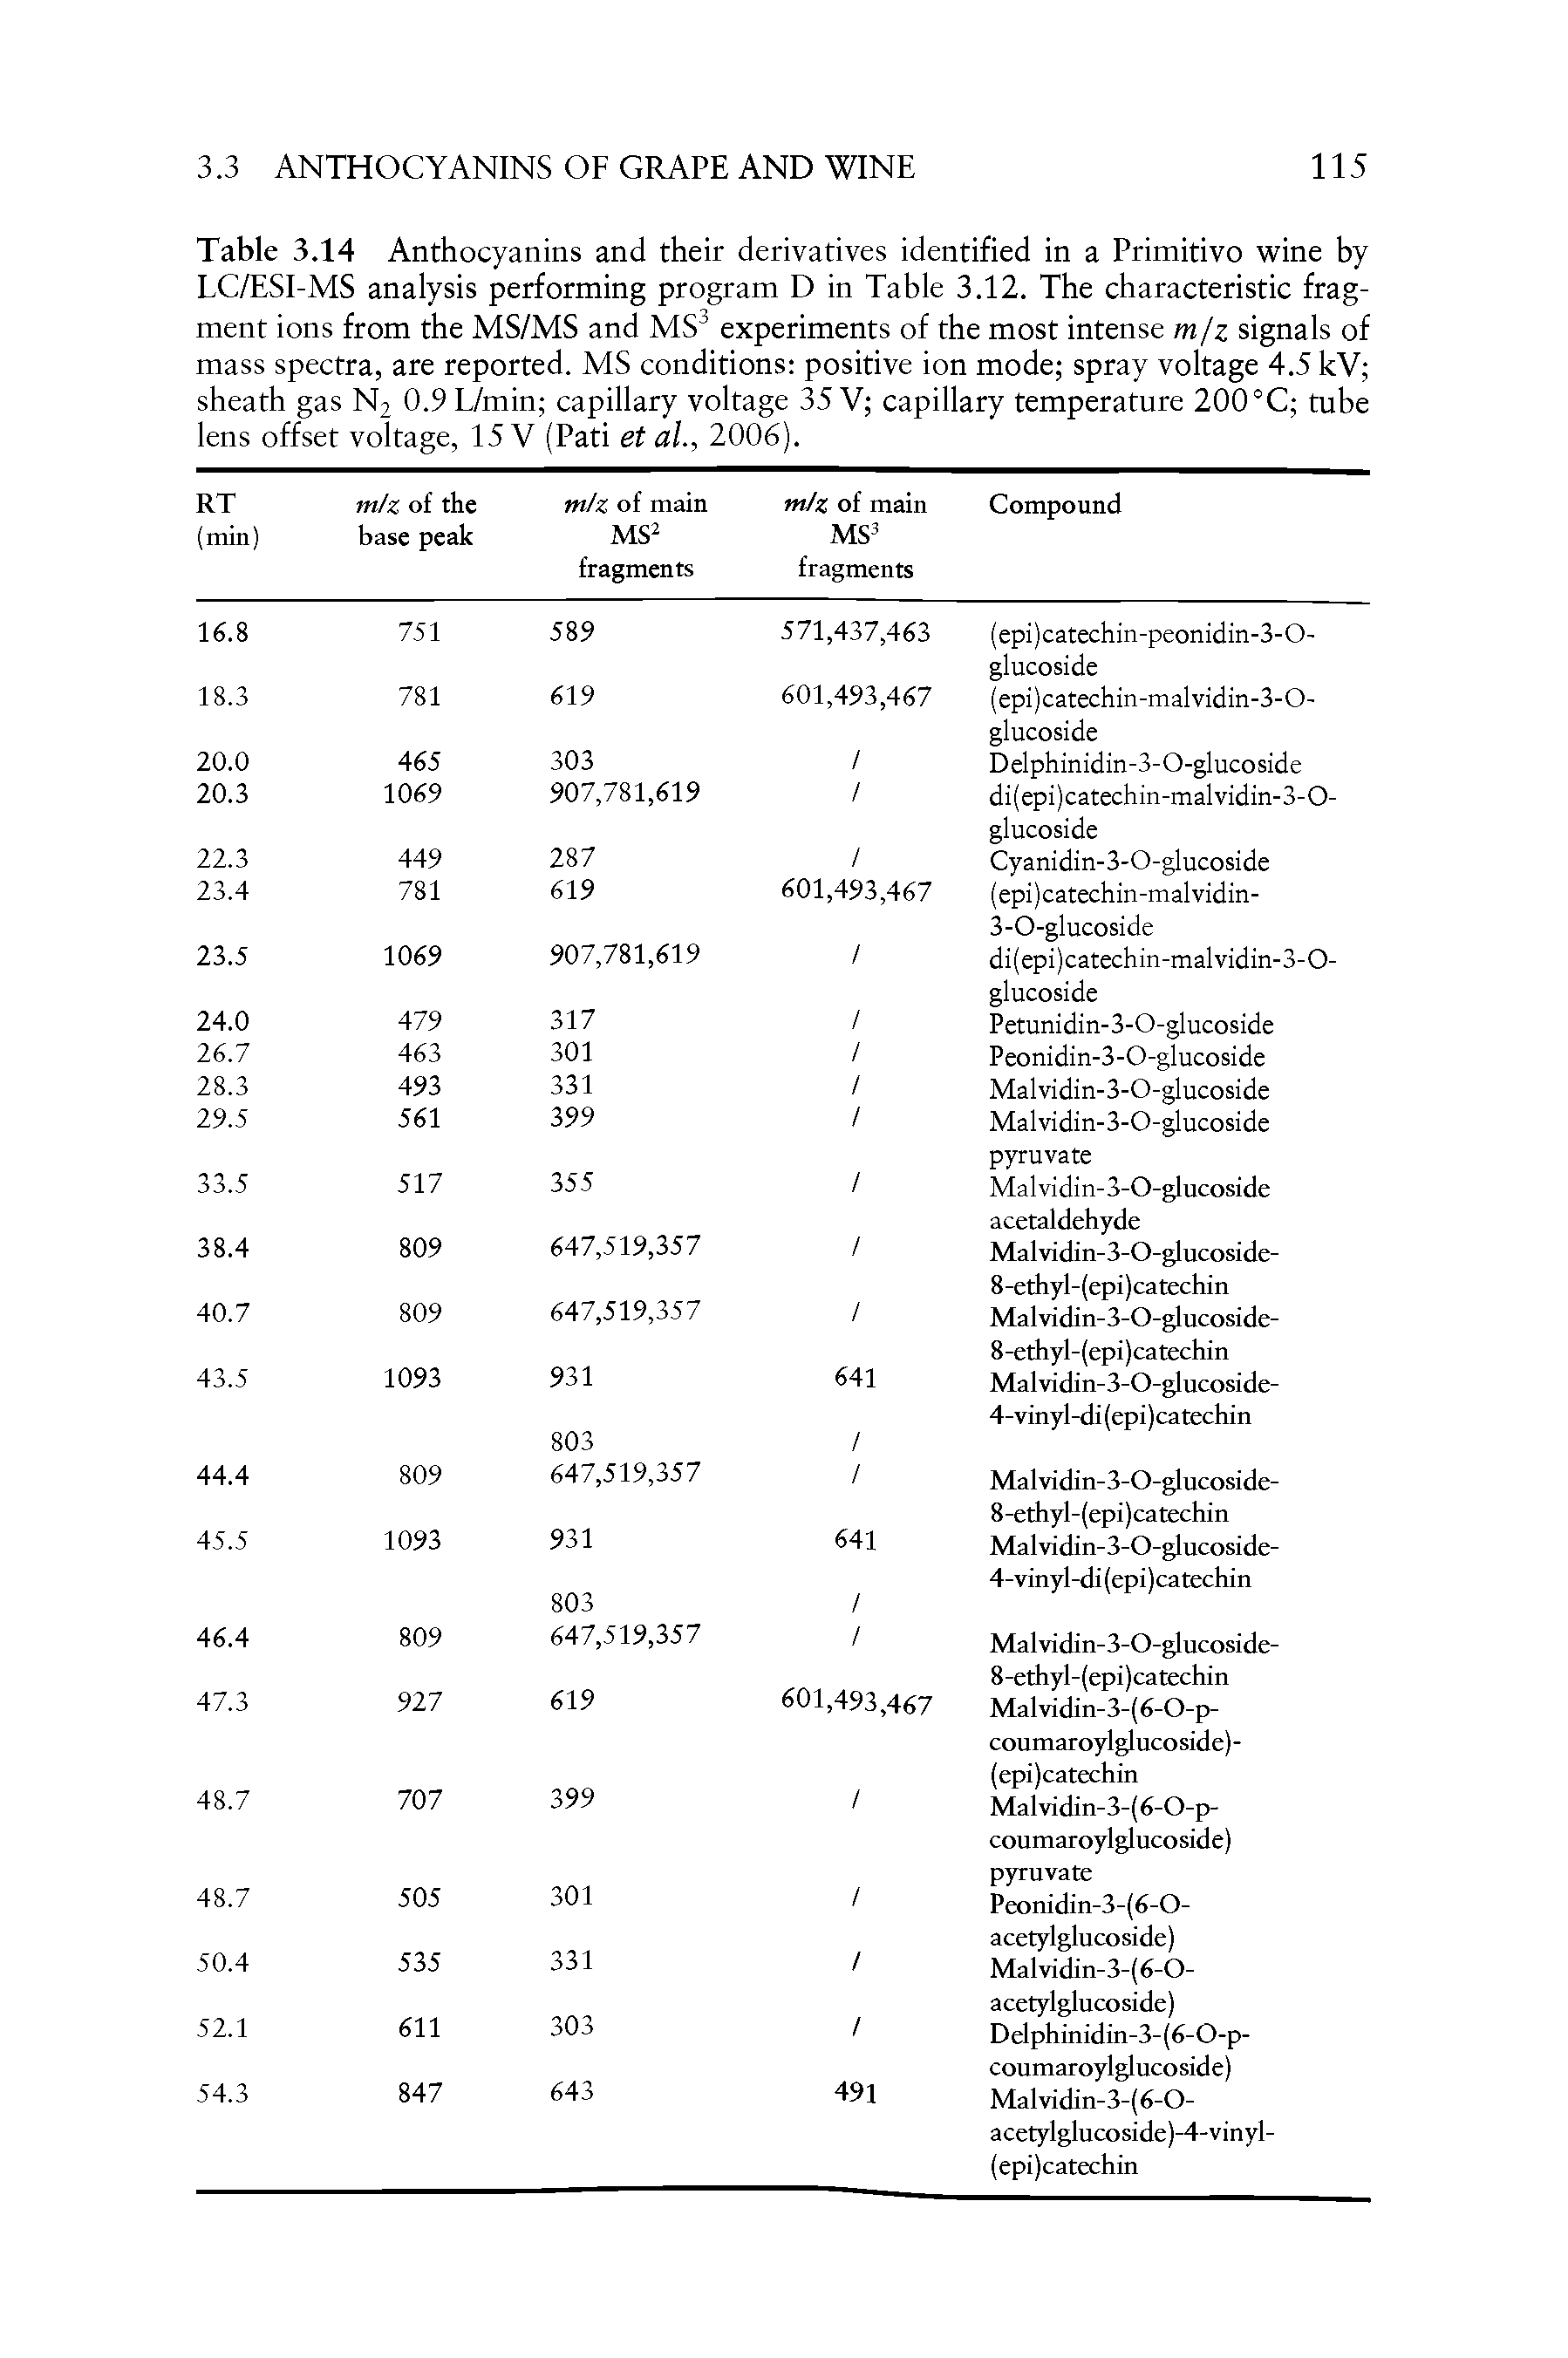 Table 3.14 Anthocyanins and their derivatives identified in a Primitivo wine by LC/ESI-MS analysis performing program D in Table 3.12. The characteristic fragment ions from the MS/MS and MS3 experiments of the most intense m/z signals of mass spectra, are reported. MS conditions positive ion mode spray voltage 4.5 kV sheath gas N2 0.9 L/min capillary voltage 35 V capillary temperature 200°C tube lens offset voltage, 15 V (Pati et al., 2006).